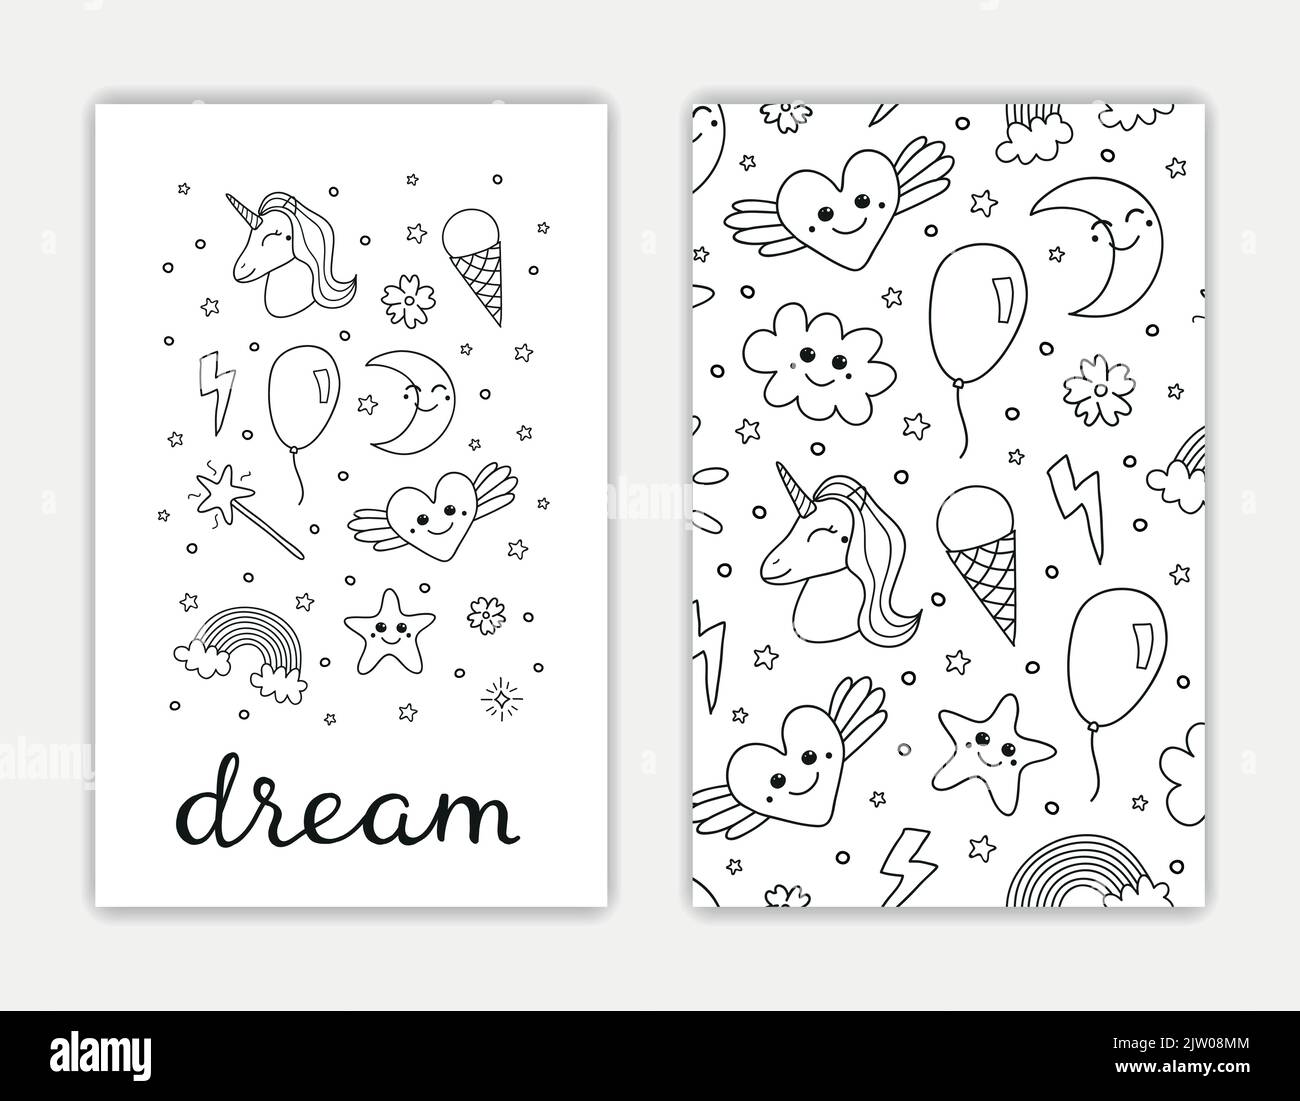 Card templates with hand drawn outline cute items and lettering. Used clipping mask. Stock Vector